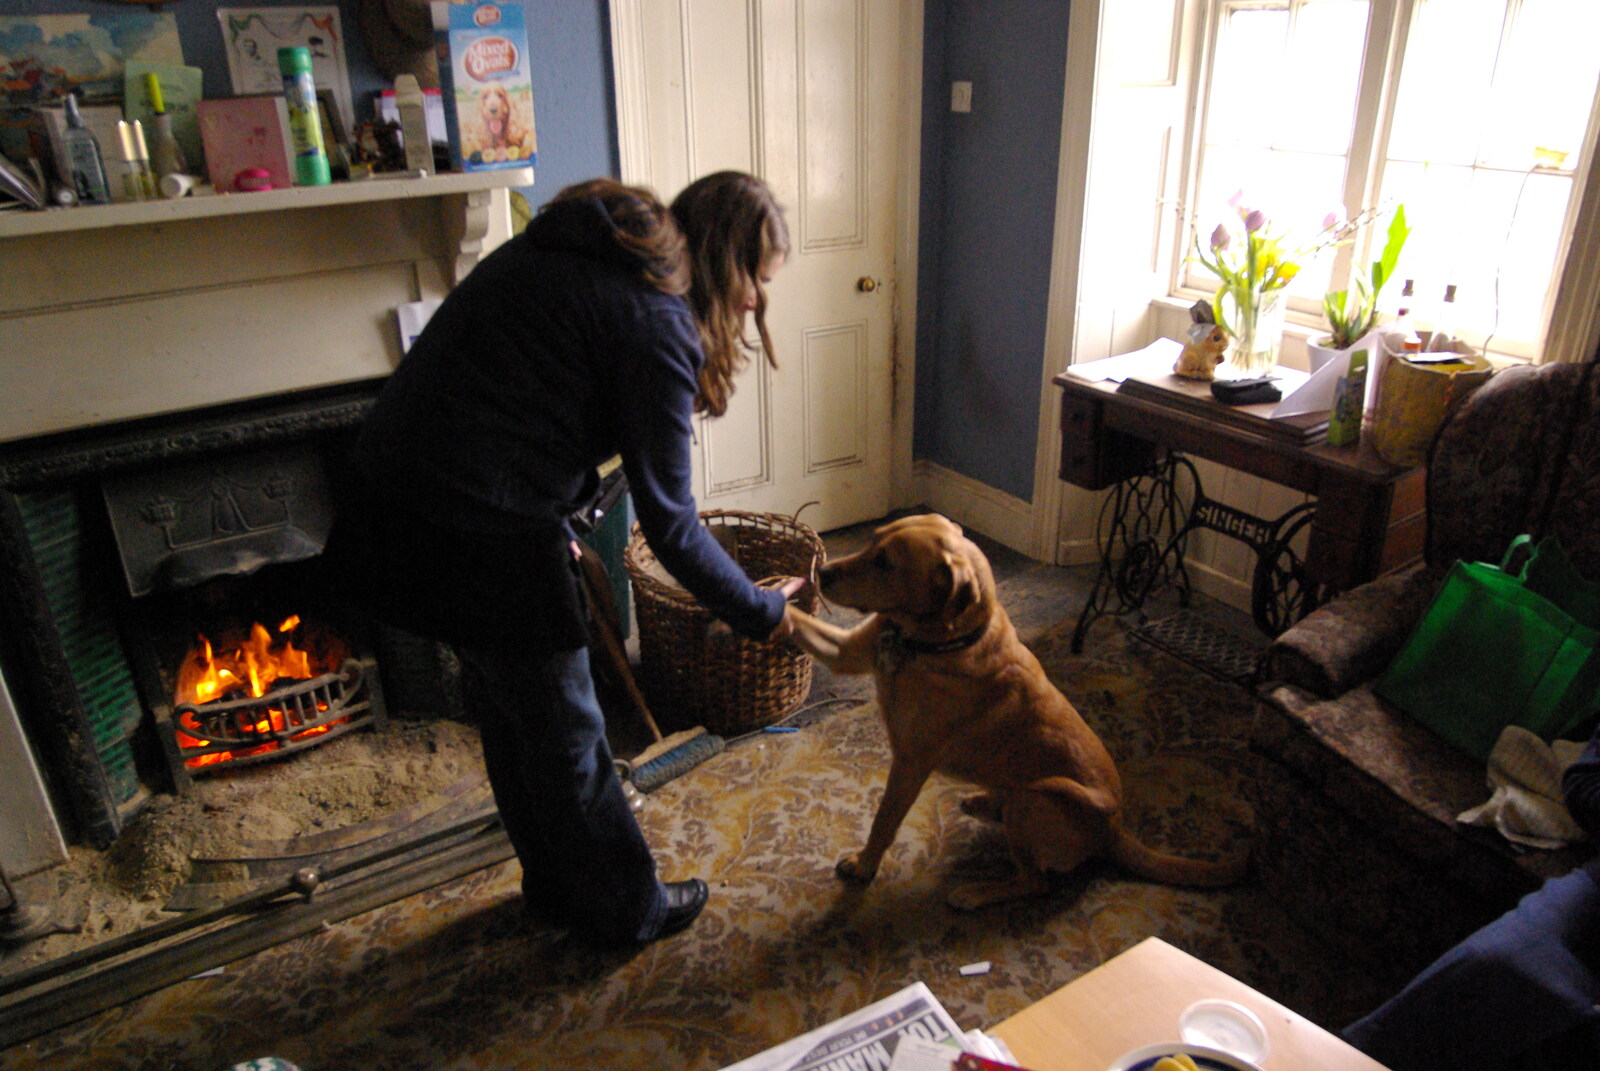 Easter in Dublin, Ireland - 21st March 2008: Isobel shakes paws with Oscar